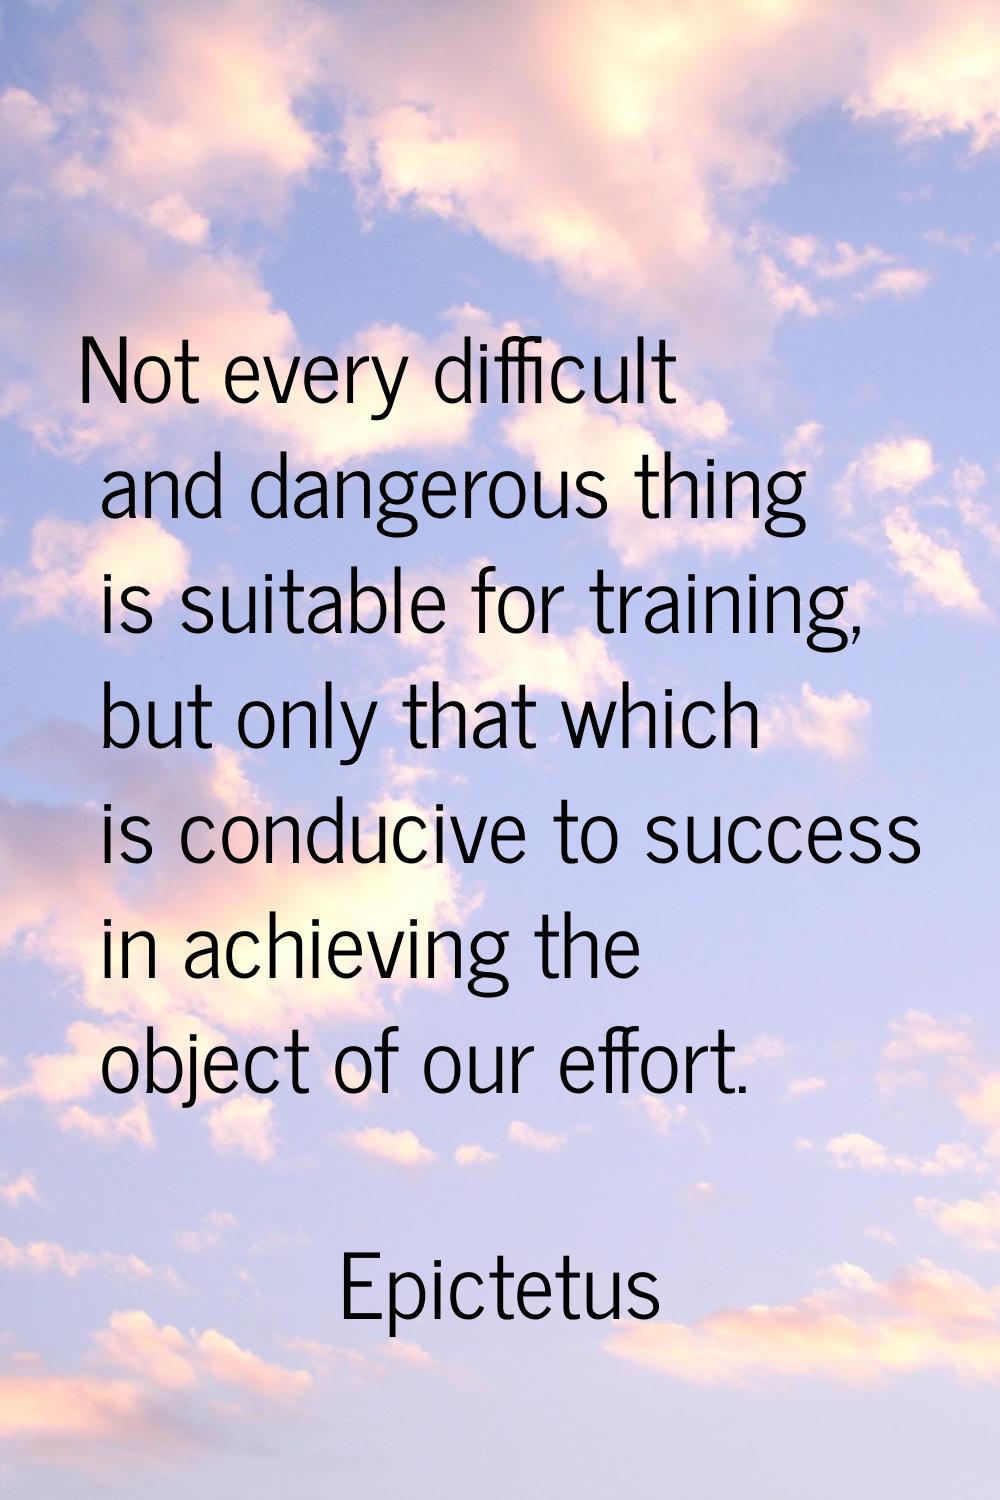 Not every difficult and dangerous thing is suitable for training, but only that which is conducive 